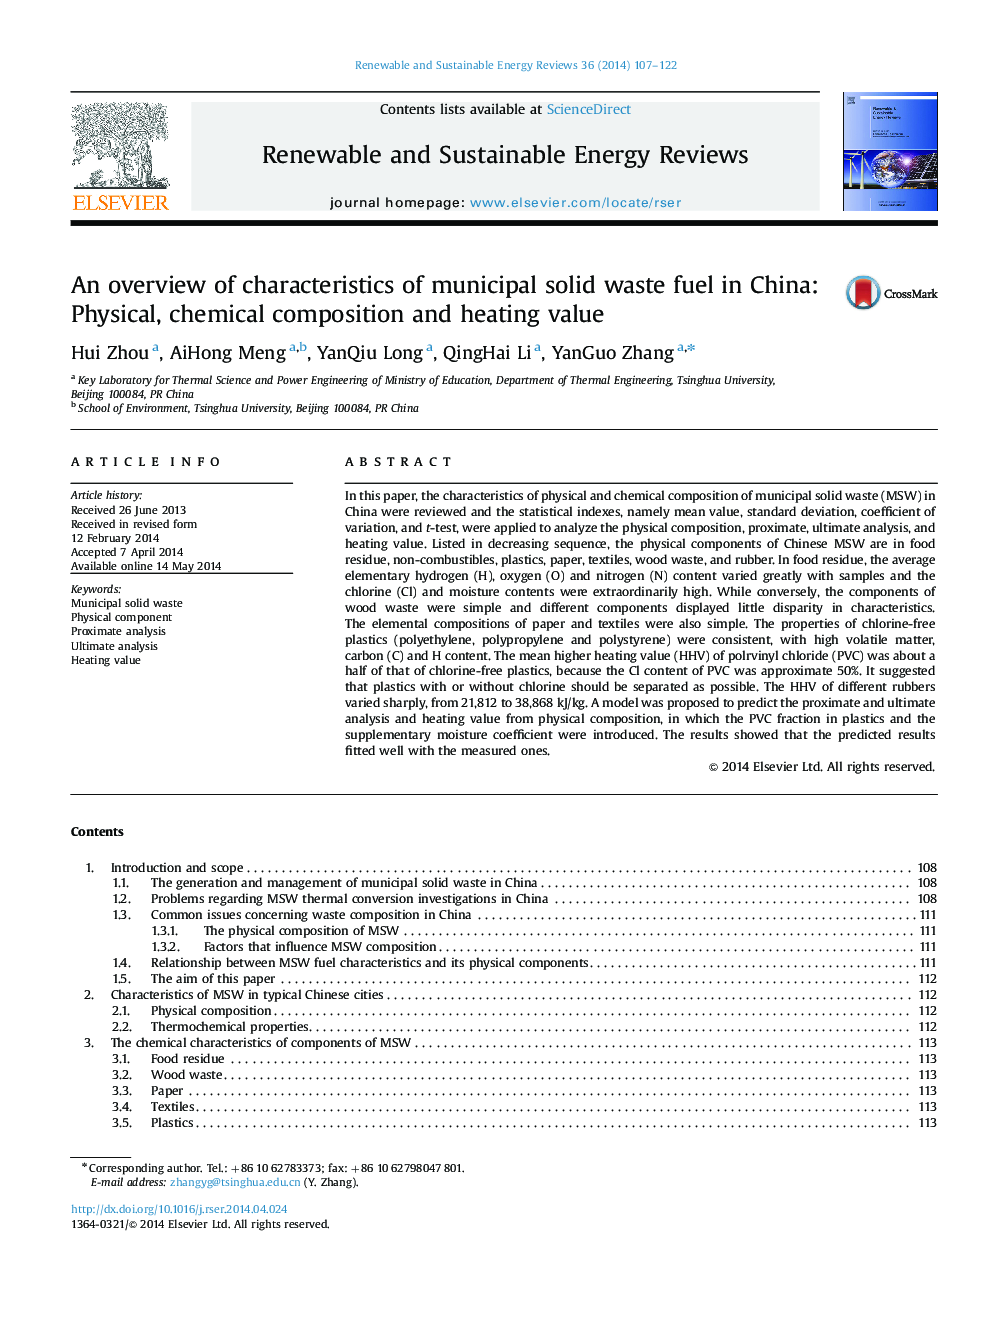 An overview of characteristics of municipal solid waste fuel in China: Physical, chemical composition and heating value